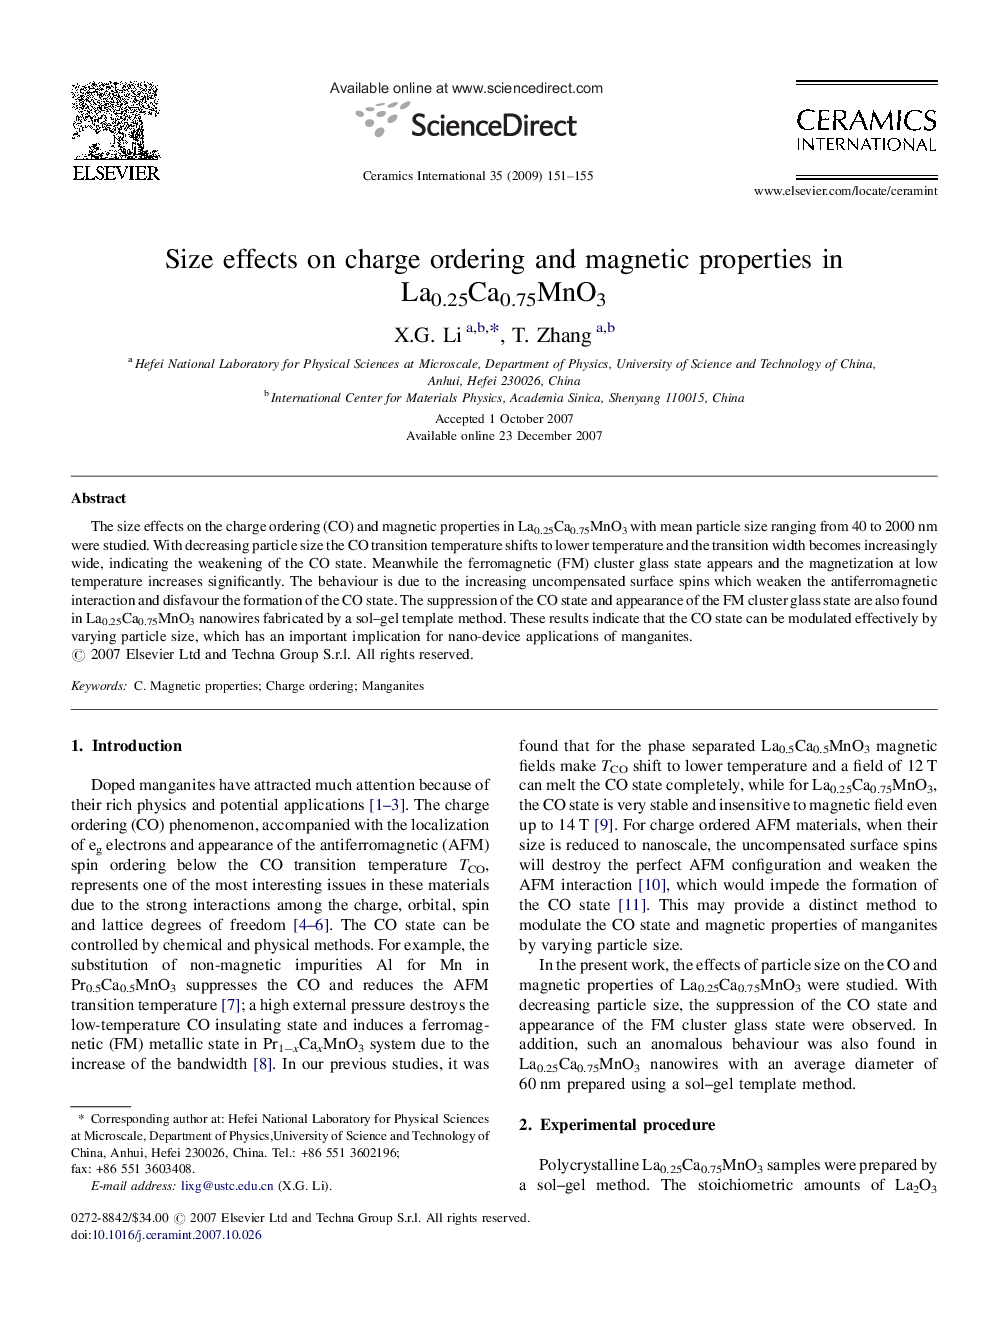 Size effects on charge ordering and magnetic properties in La0.25Ca0.75MnO3